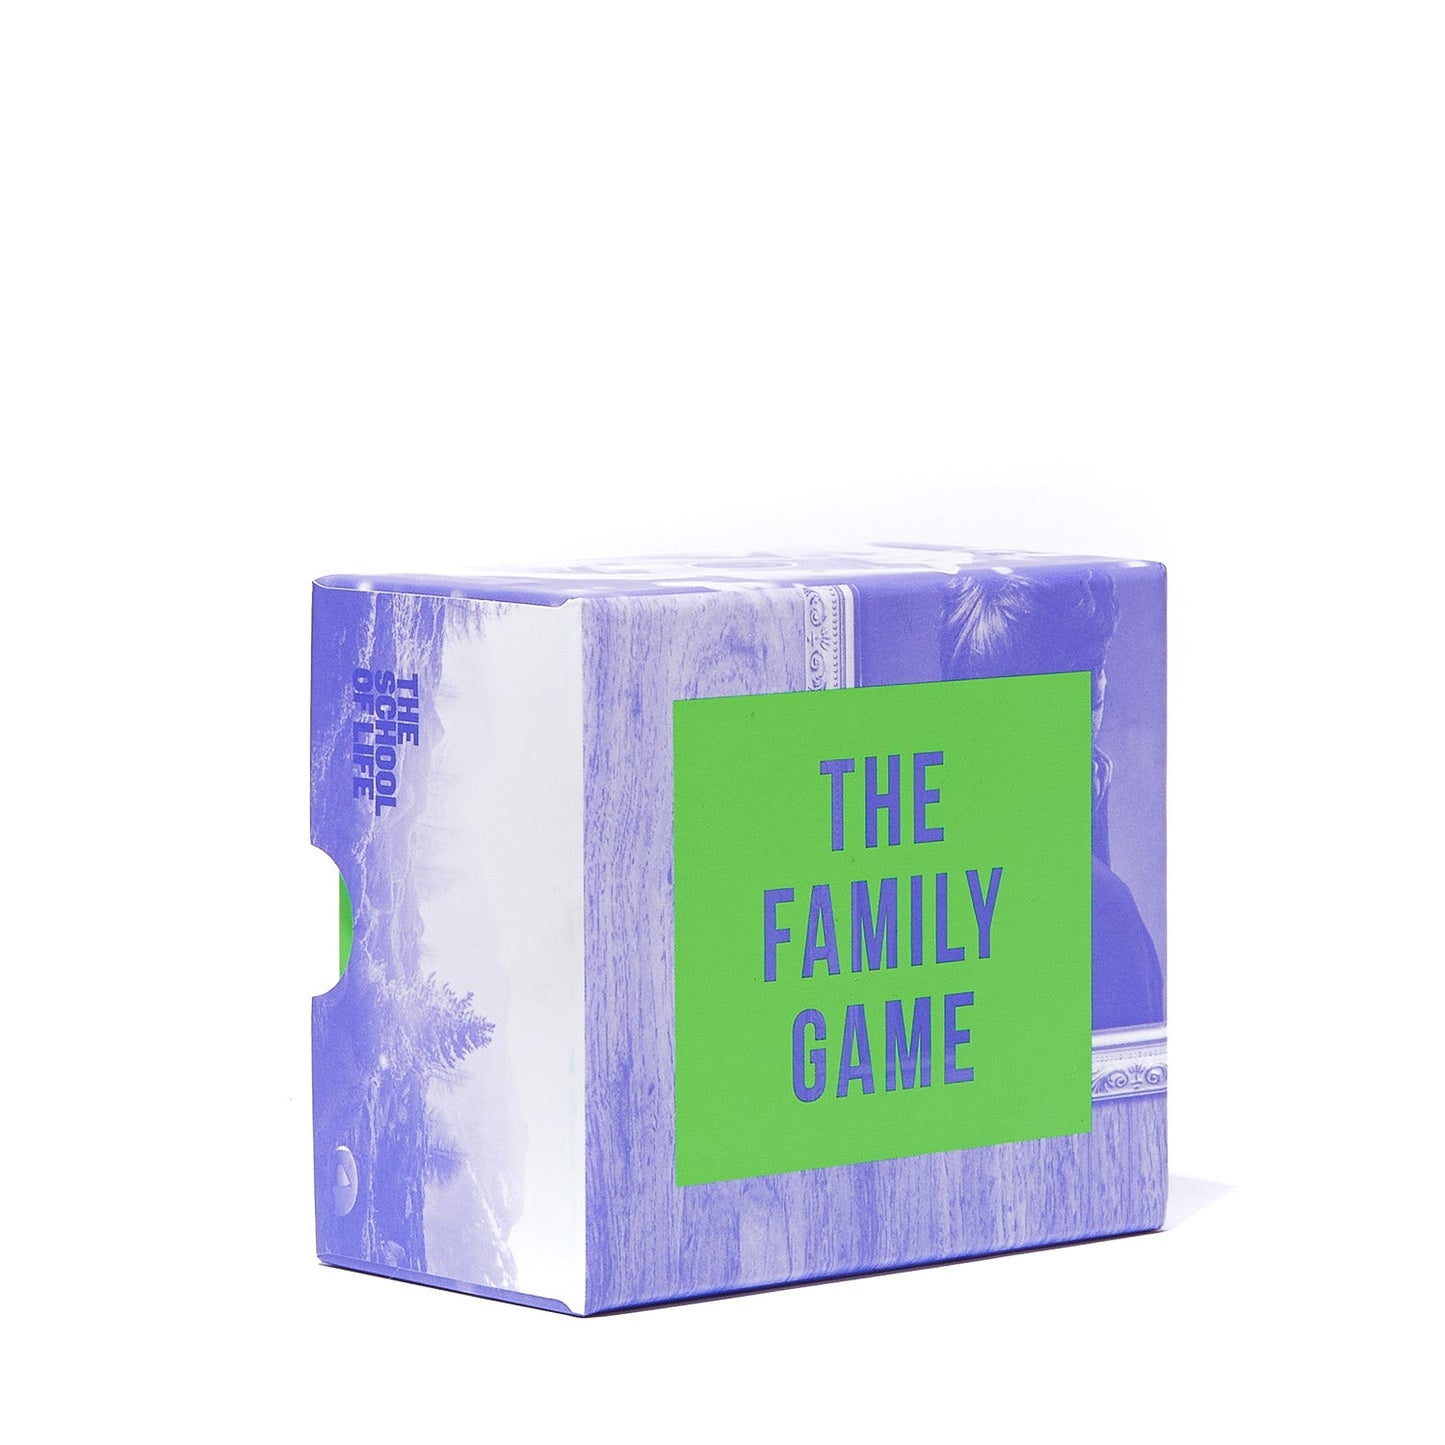 THE FAMILY GAME